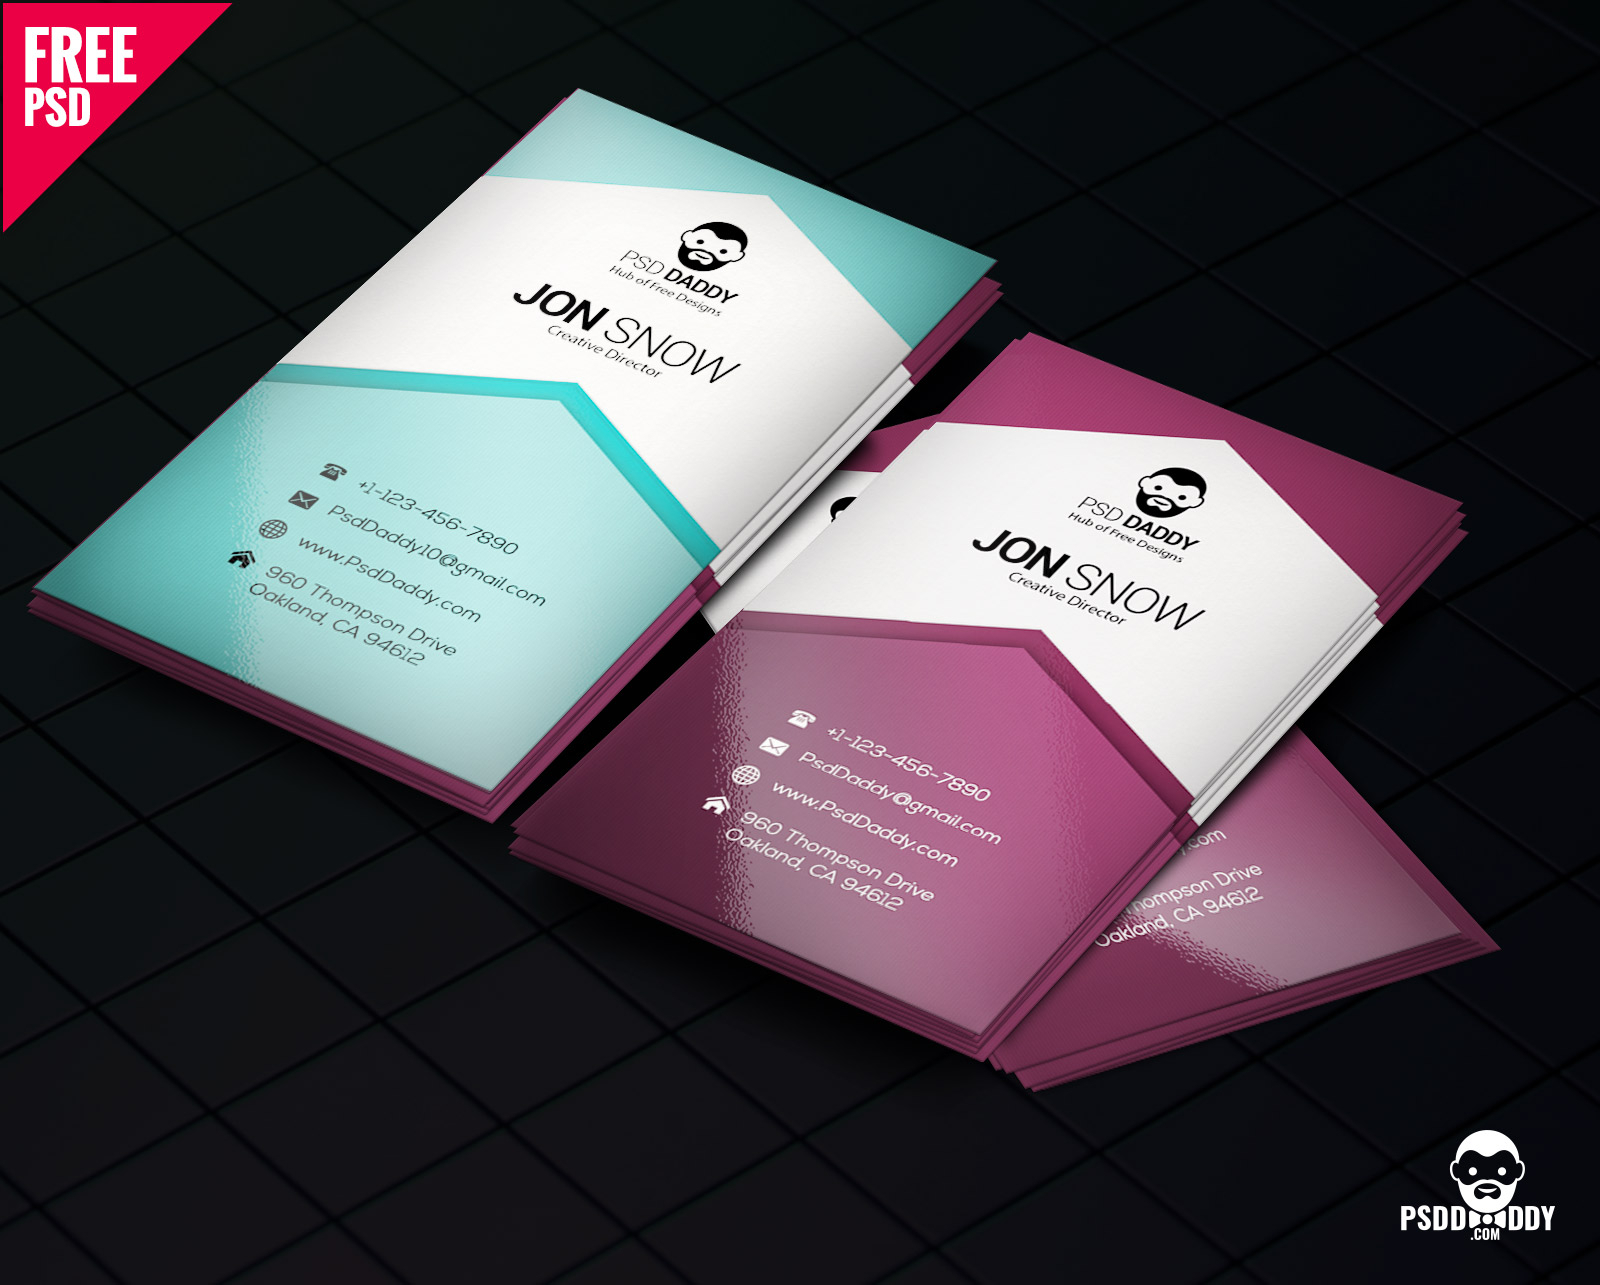 Download]Creative Business Card Psd Free | Psddaddy Regarding Visiting Card Template Psd Free Download